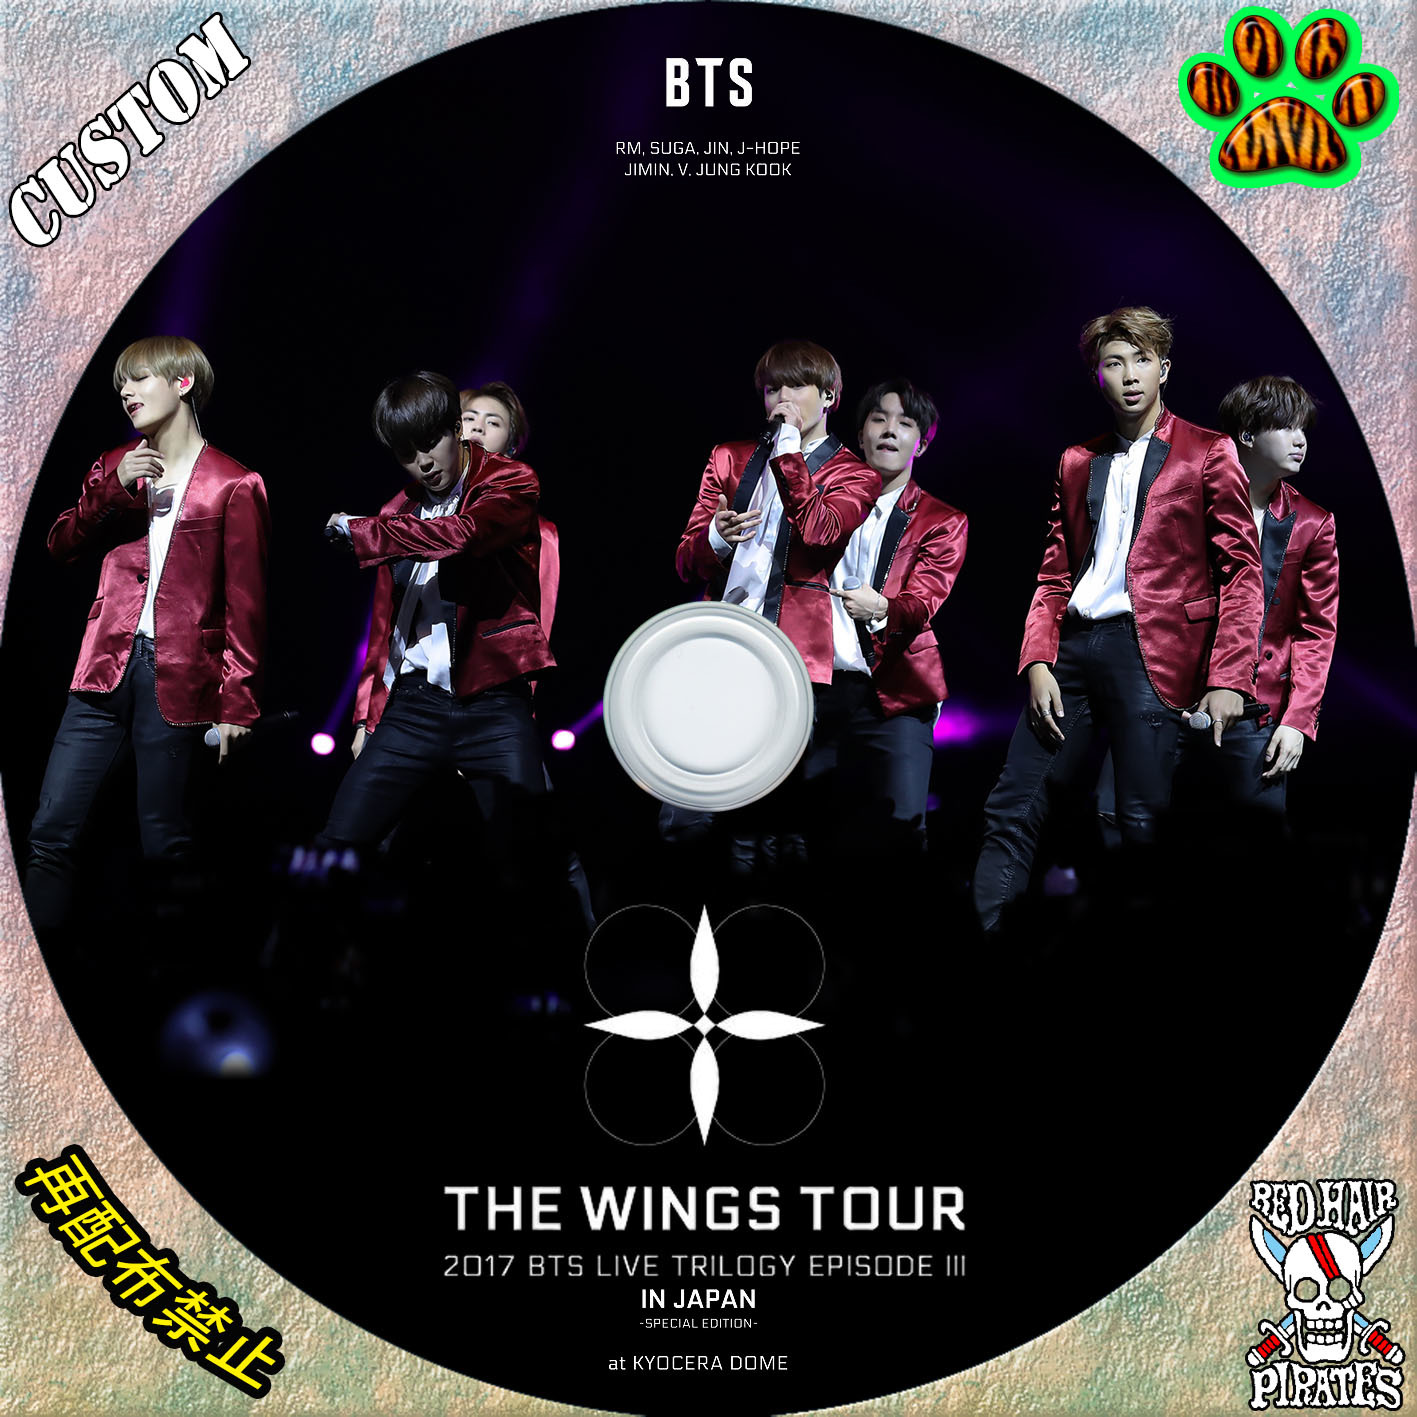 2017 BTS LIVE TRILOGY EPISODE III THE WINGS TOUR ~JAPAN EDITION ...